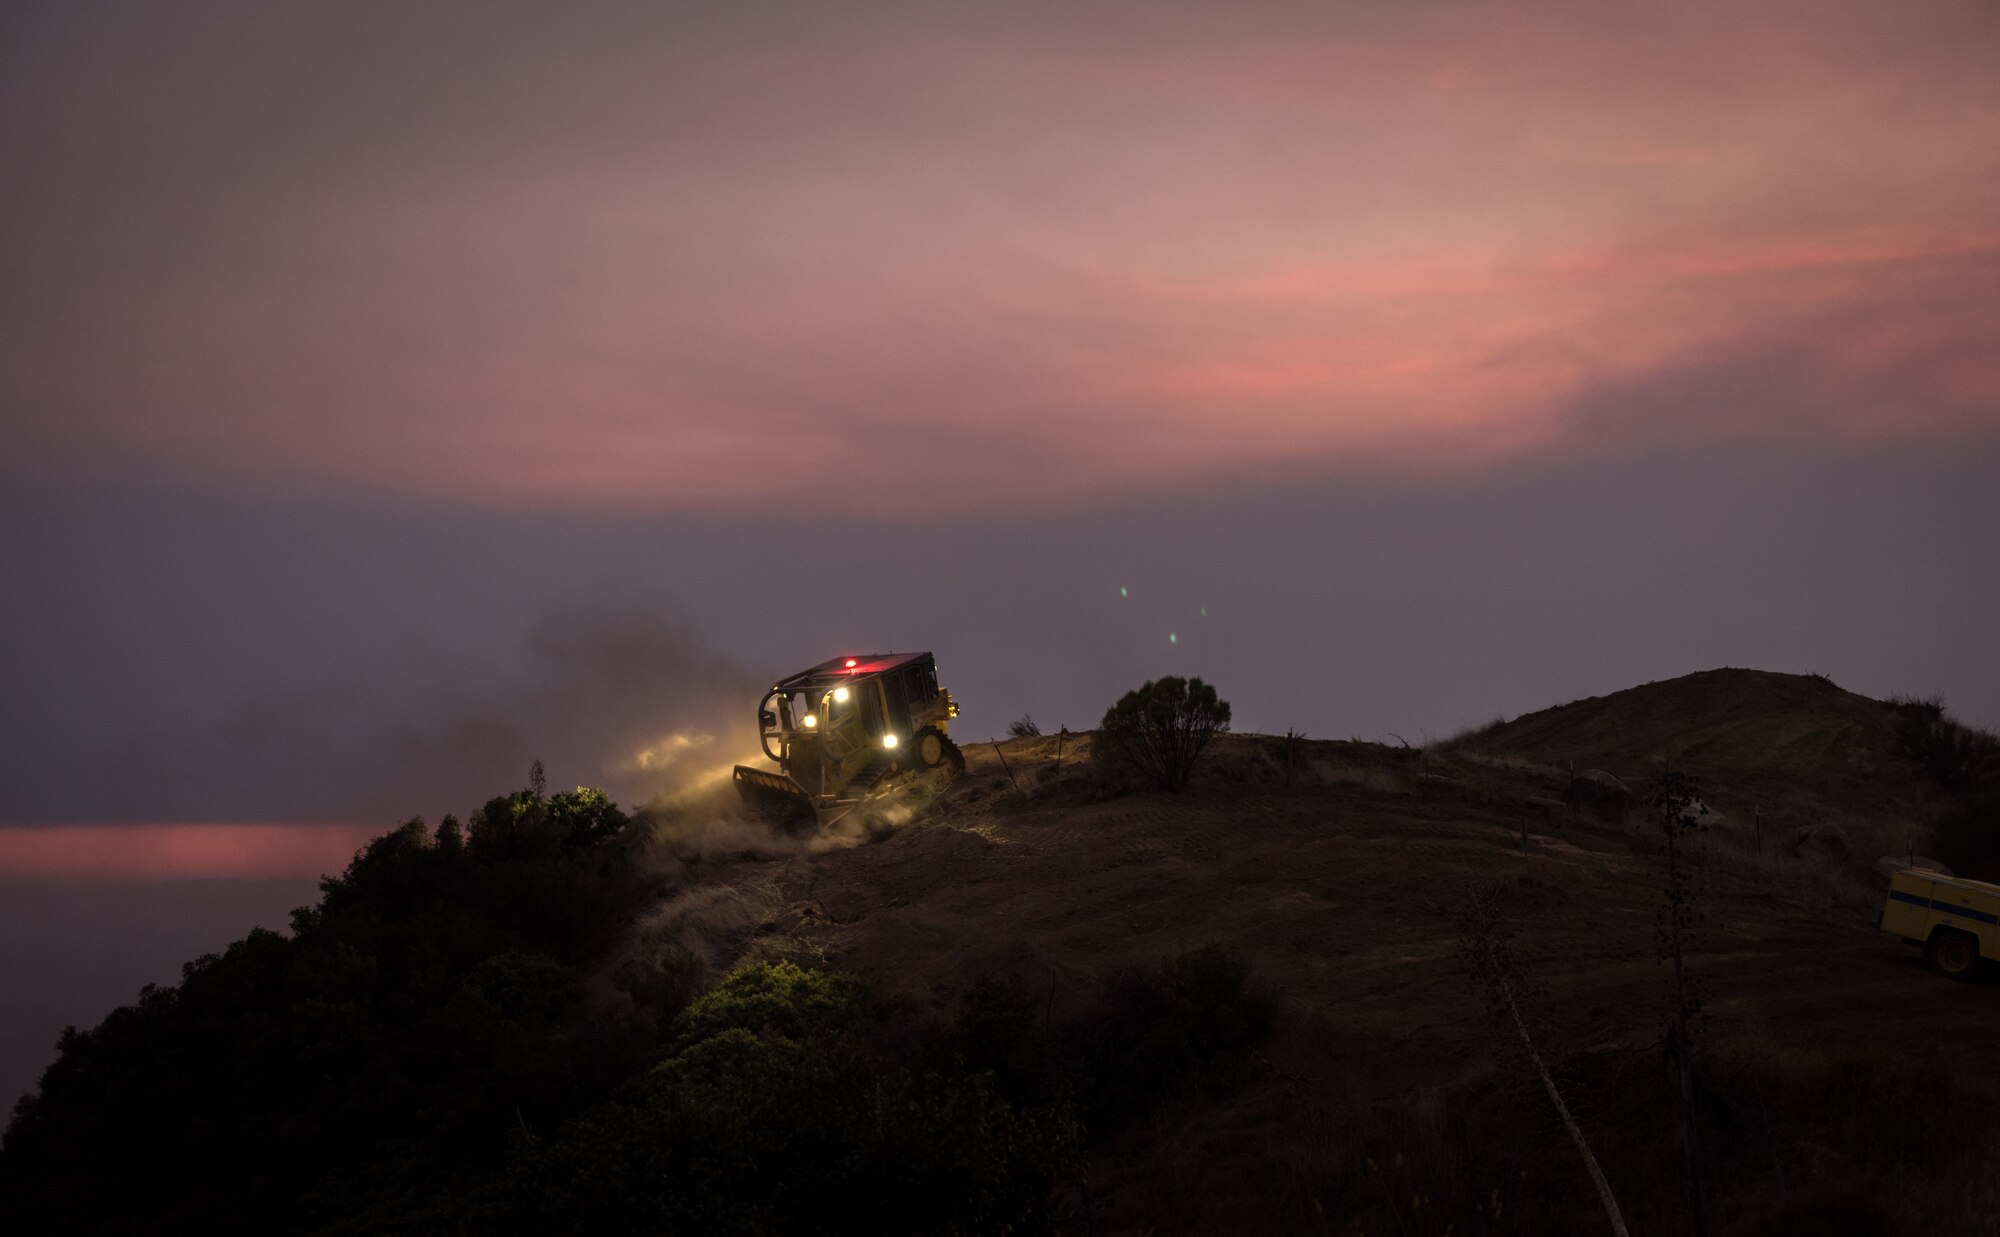 A bulldozer clears away foliage to form a fire-break on a ridge in the Los Padres National Forest above Santa Barbara, California, Dec. 11, 2017. C-130Js of the 146th California Air National Guard Airlift Wing dropped fire retardant chemicals along these fire-breaks to further slow the advance of the Thomas Fire, a large wildfire burning through Ventura and Santa Barbara Counties. (U.S. Air Force photo by J.M. Eddins Jr.)